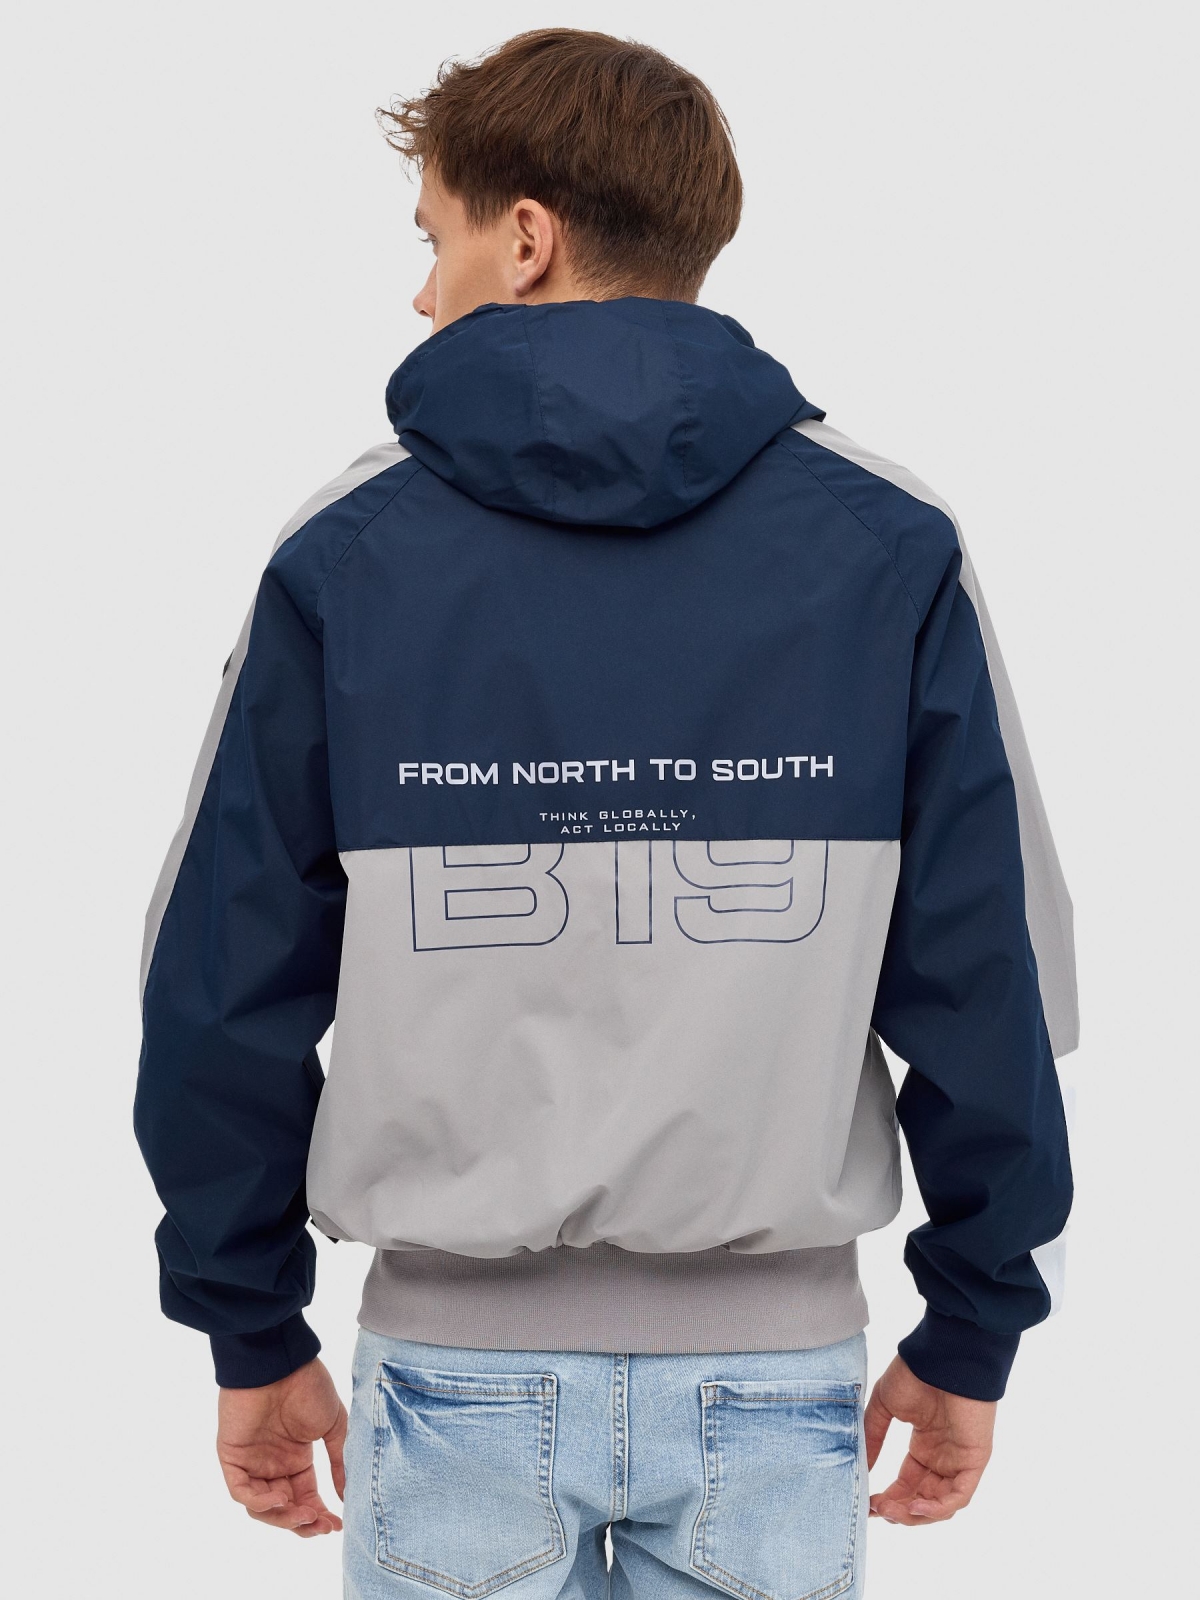 Lightweight hooded jacket navy middle back view